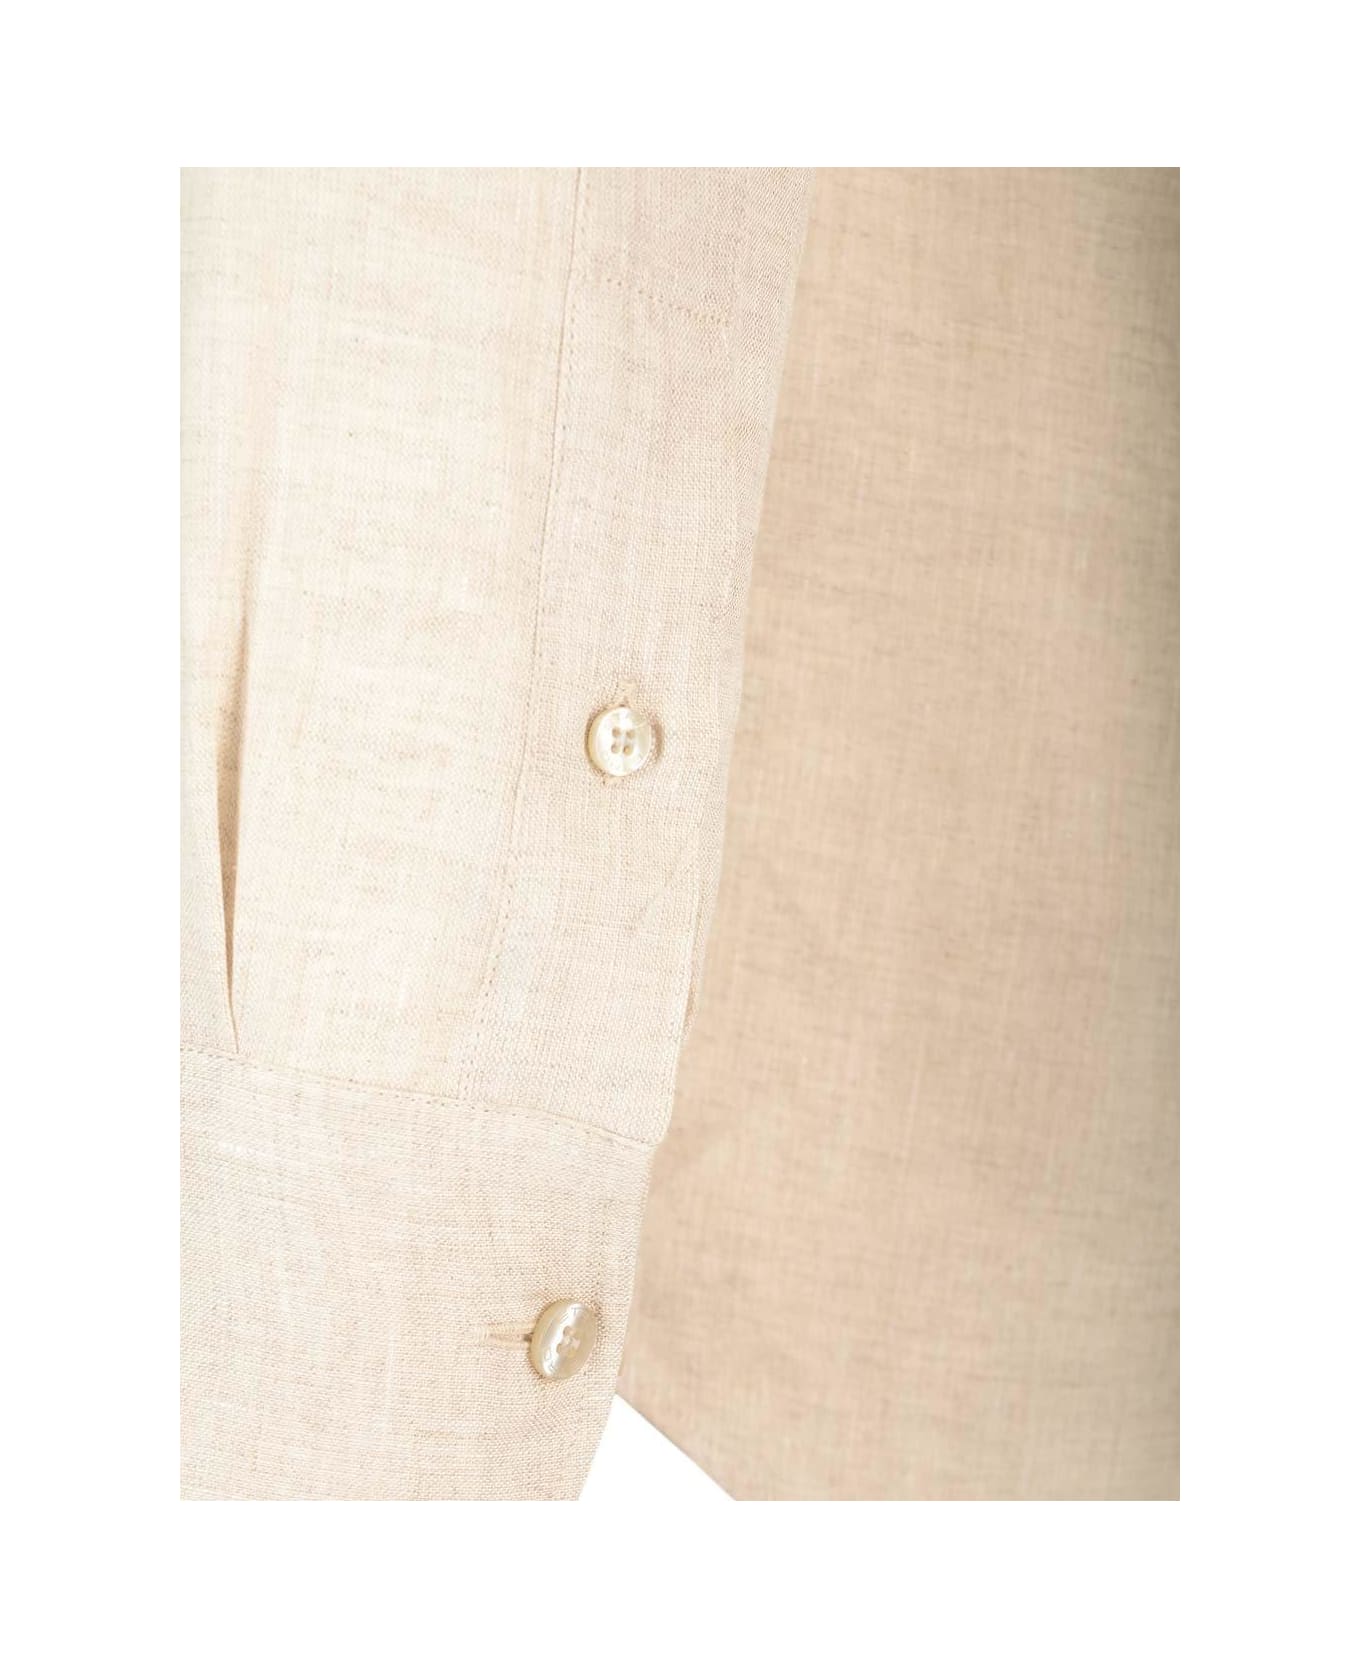 Etro Pegaso Embroidered Long-sleeved Shirt - NEUTRALS シャツ